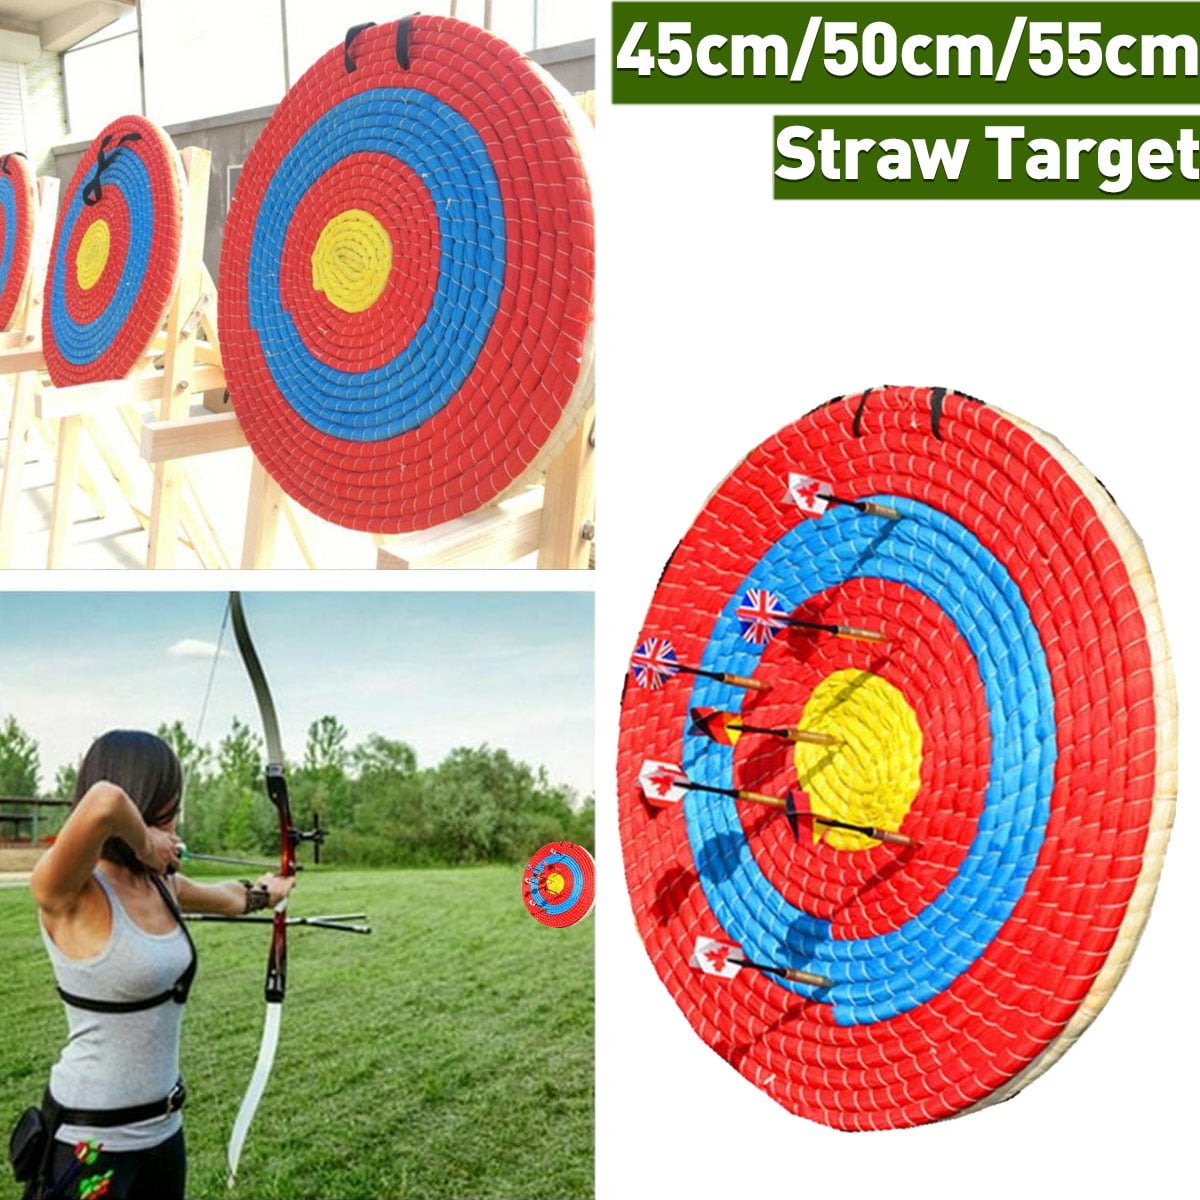 22" Grass Archery Shooting Bow Straw Arrow Target Hunting Practice Outdoor Sport 